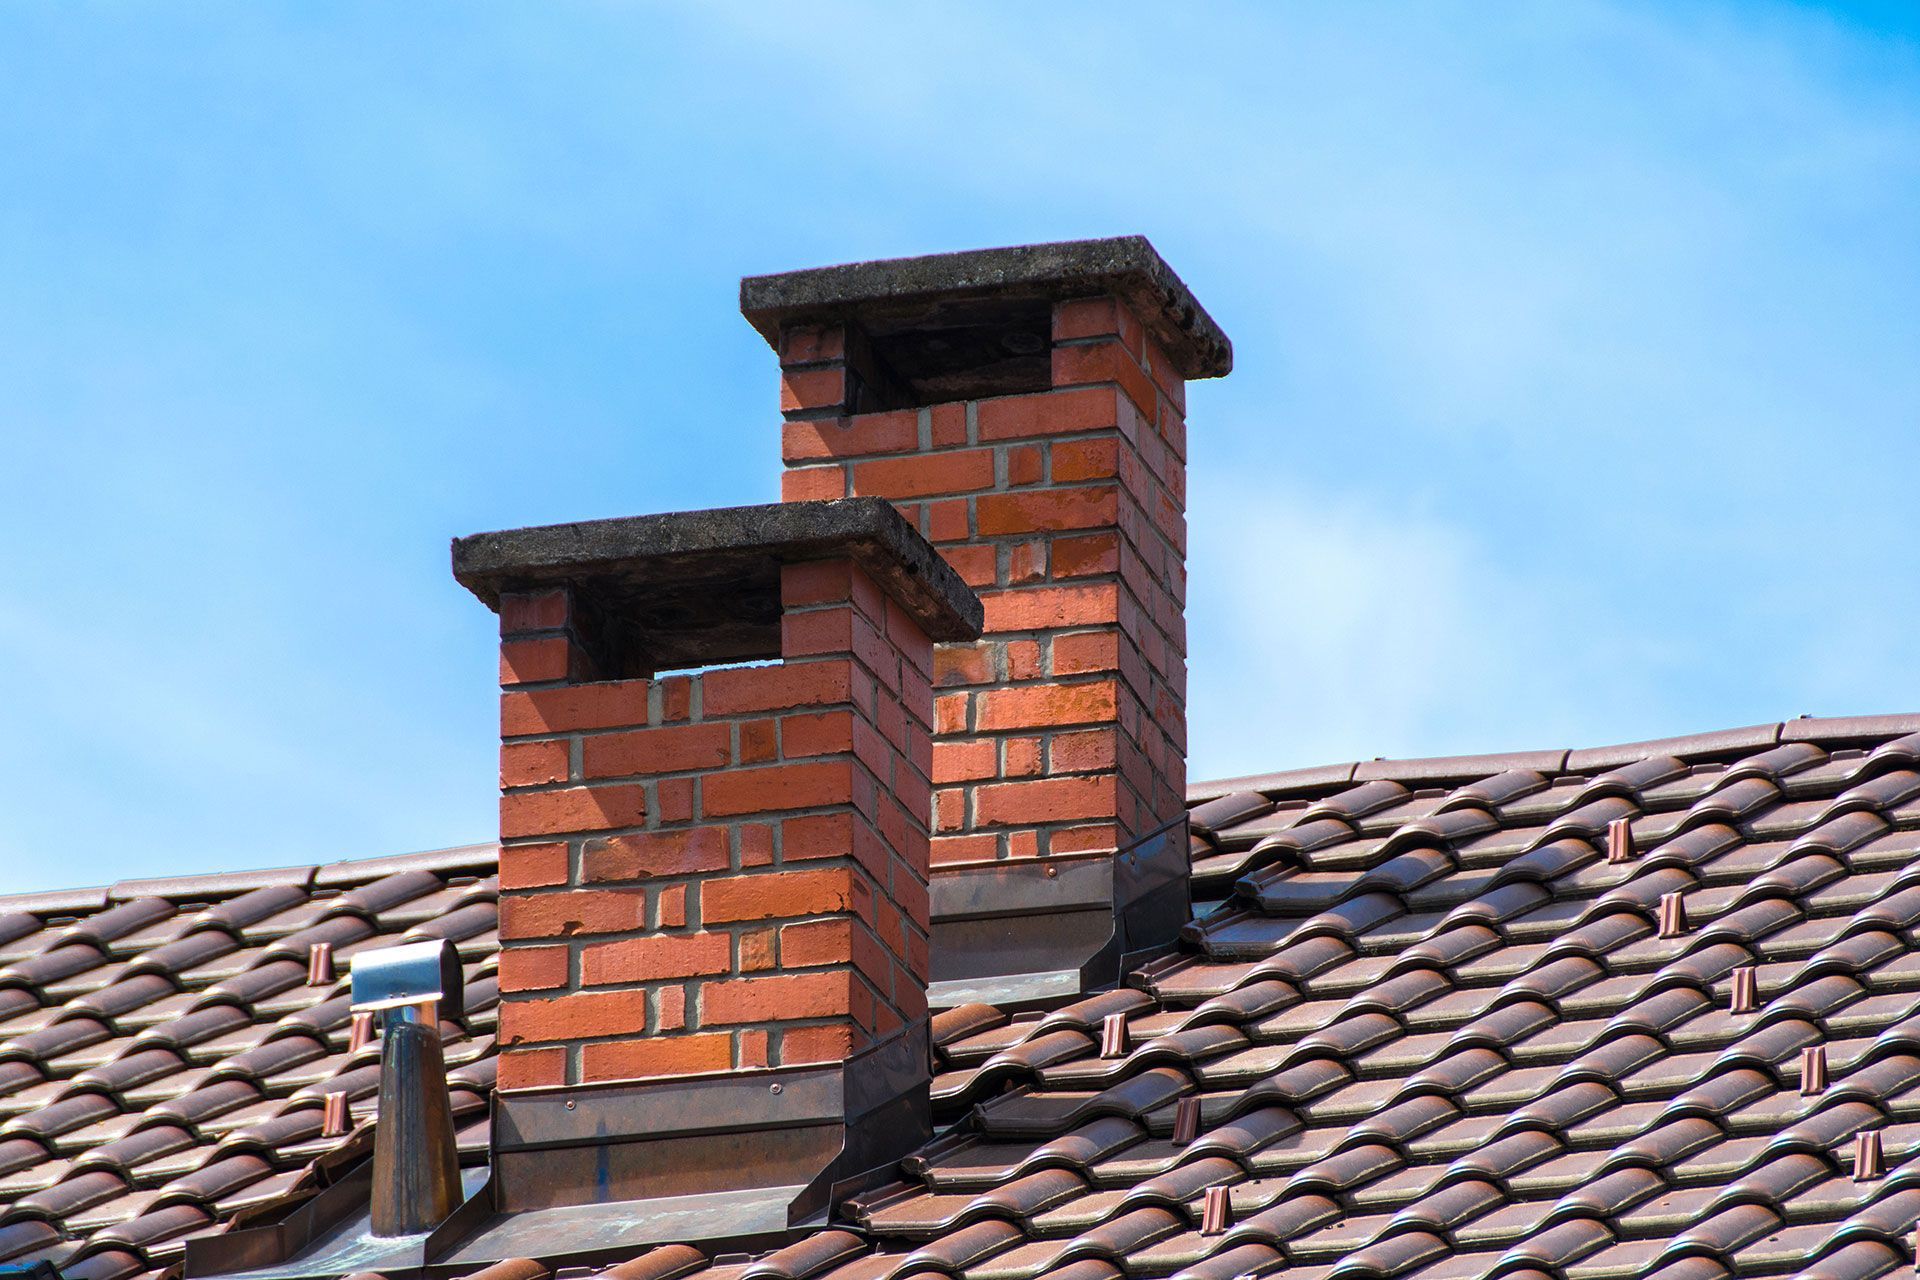 Two brick chimneys on top of a tiled roof